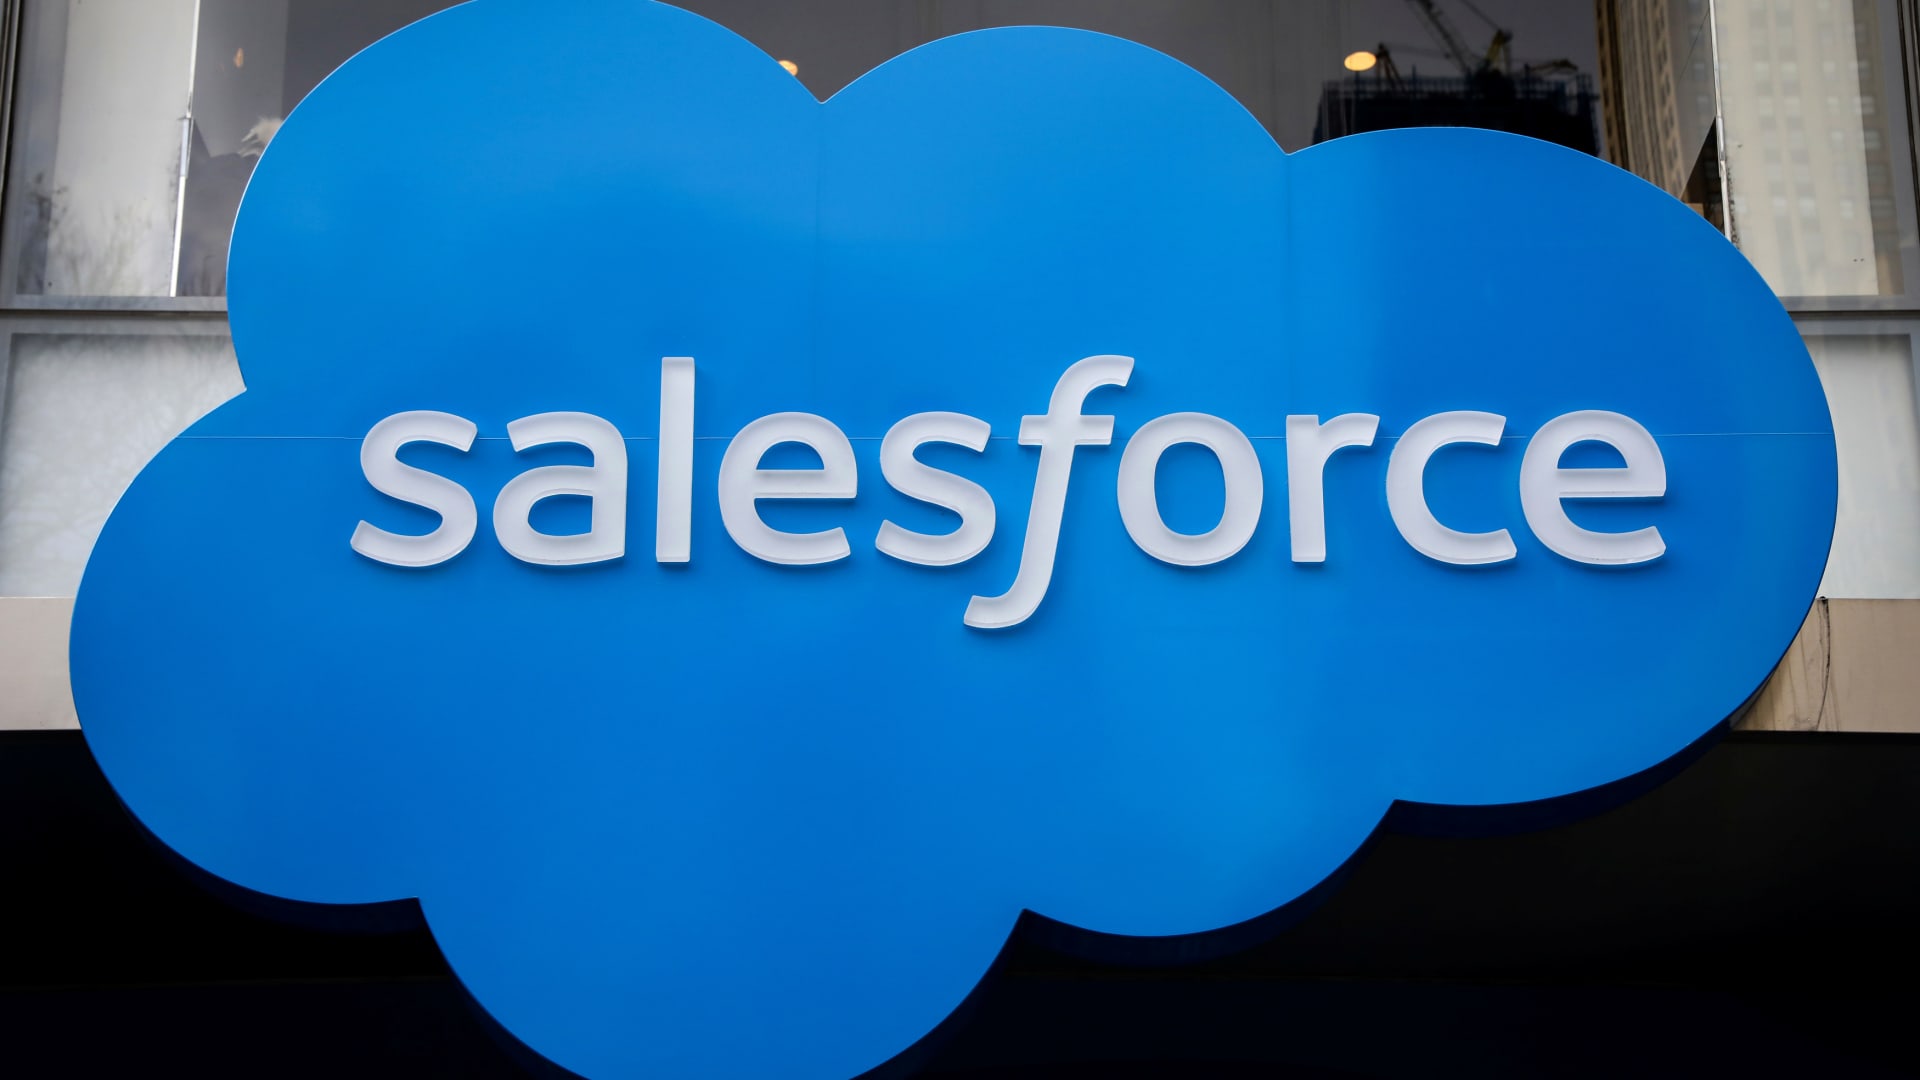 The company logo for Salesforce.com is displayed on the Salesforce Tower in New York City, U.S., March 7, 2019. 